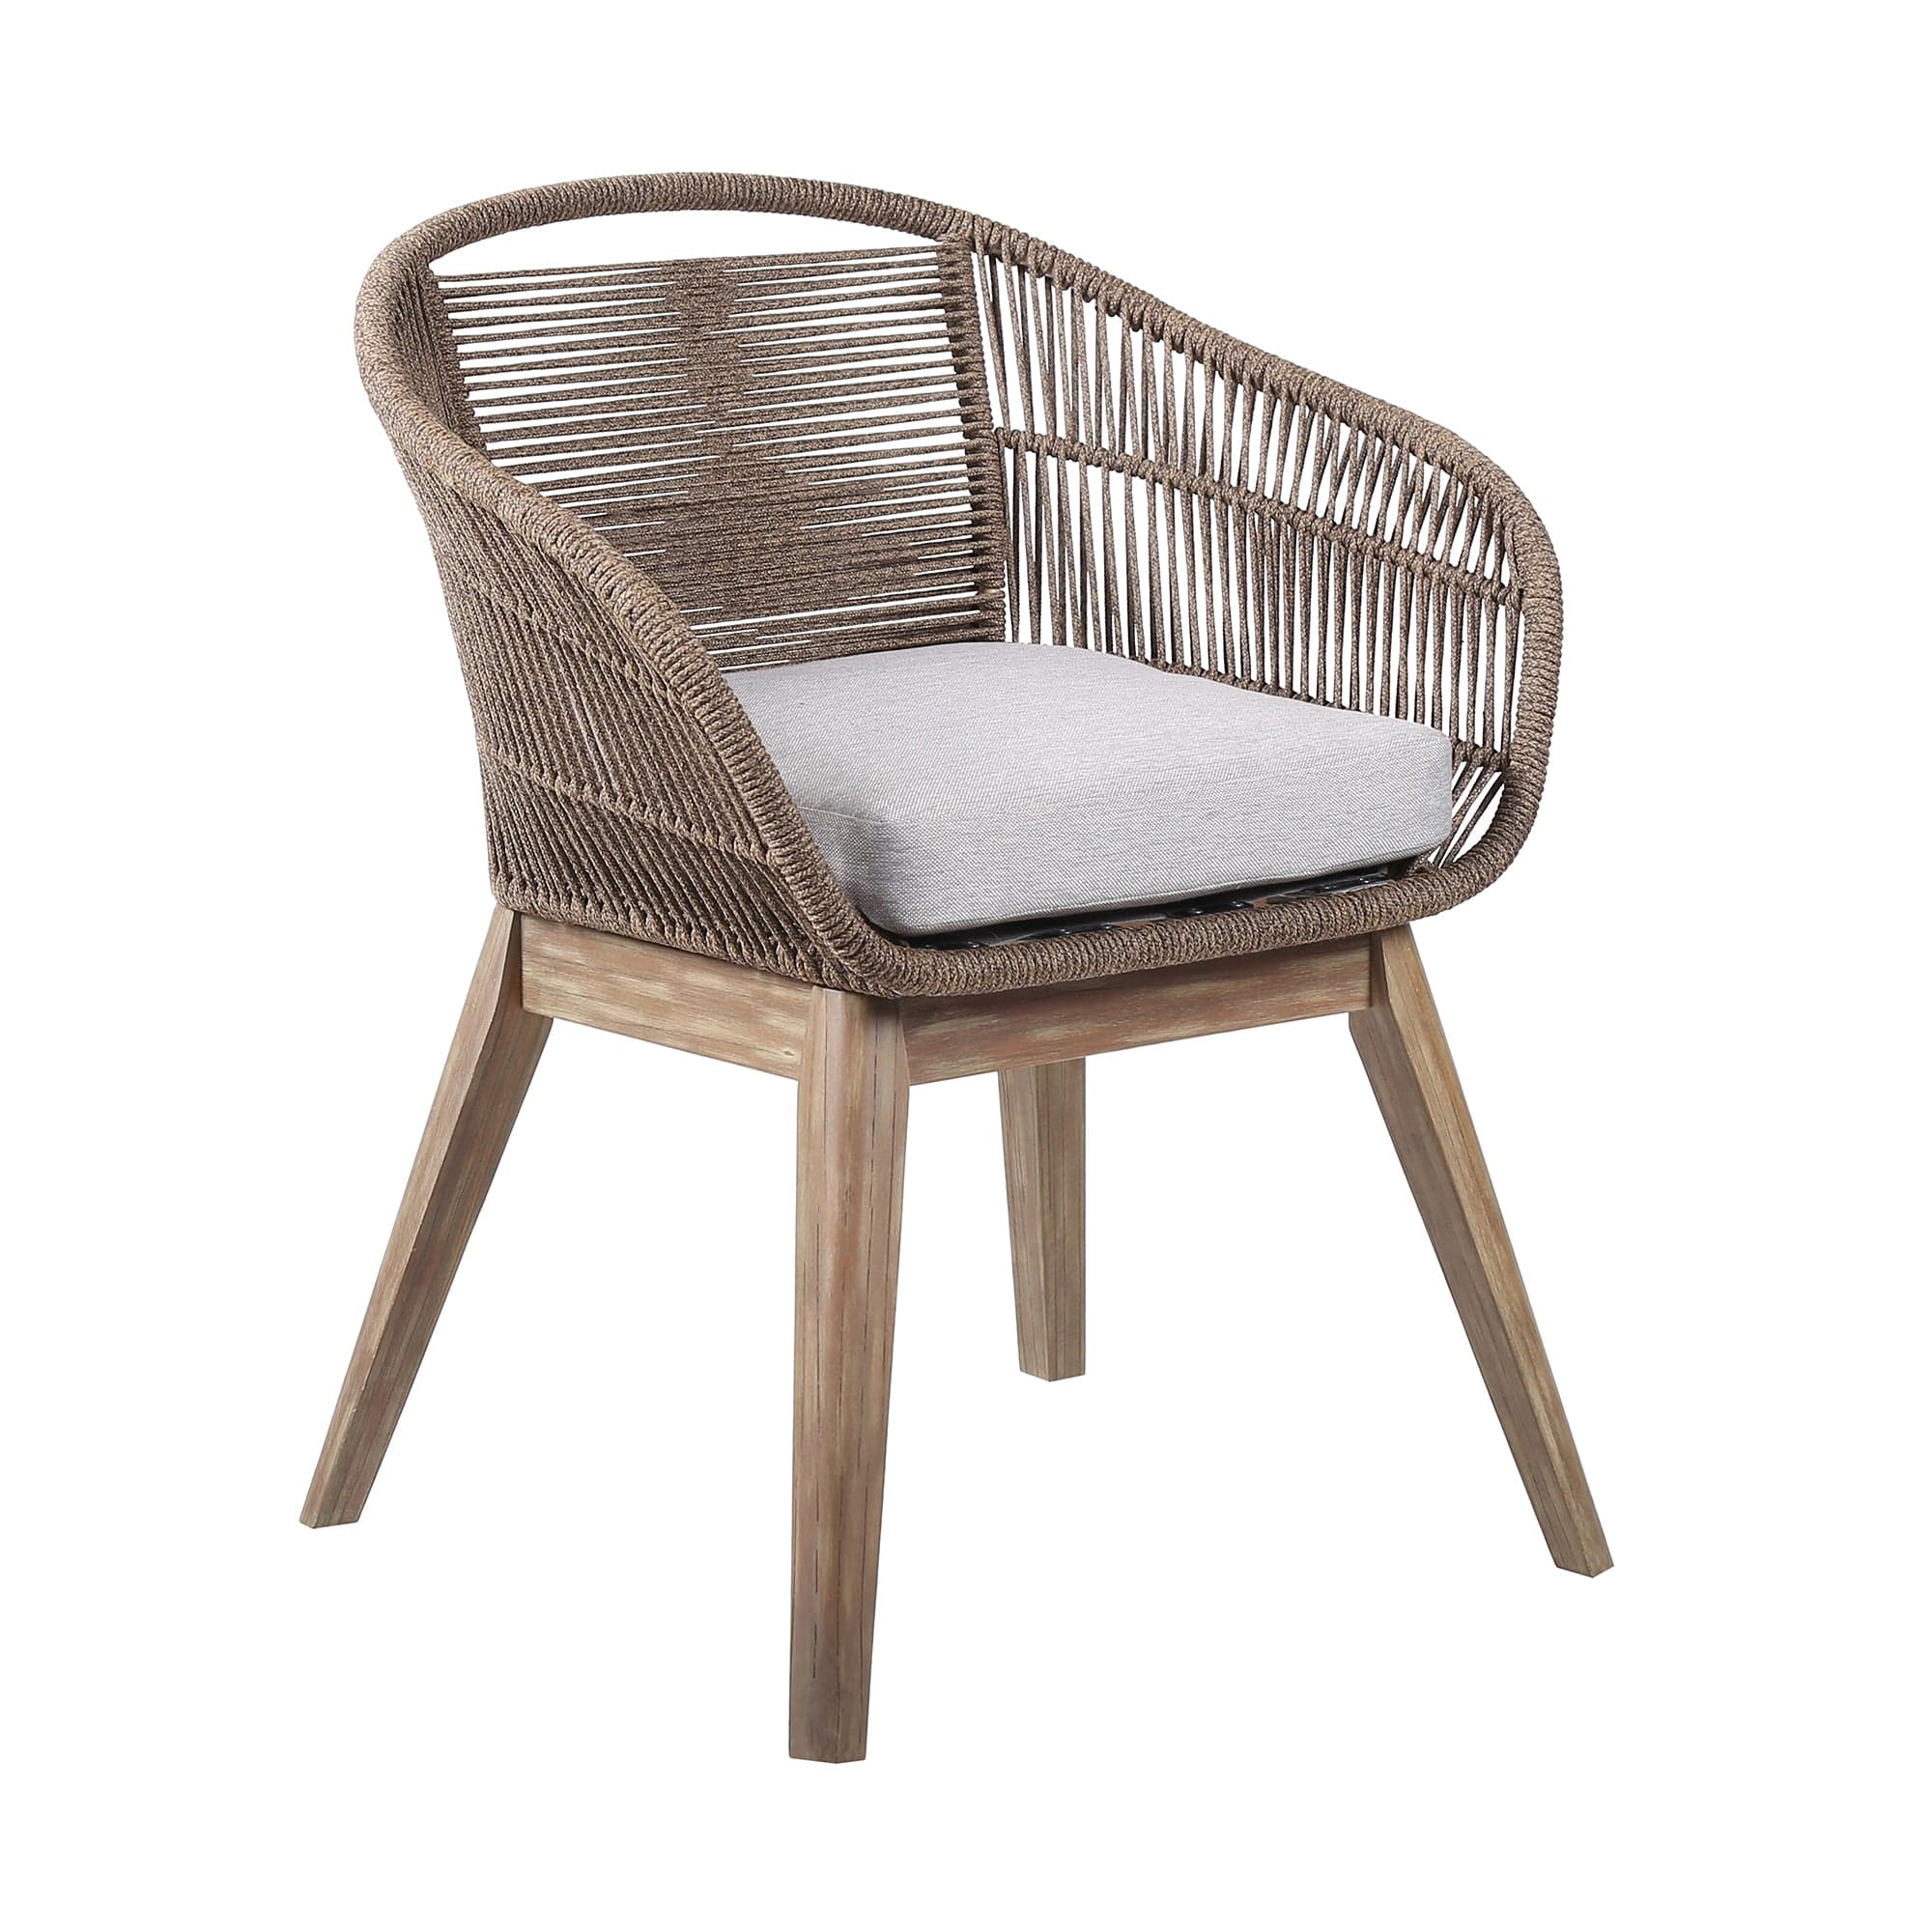 Armen Living Outdoor Dining Chair Light Armen Living | Tutti Frutti Indoor Outdoor Dining Chair in Dark Eucalyptus Wood with Latte Rope and Grey Cushions | LCTFSIGRY